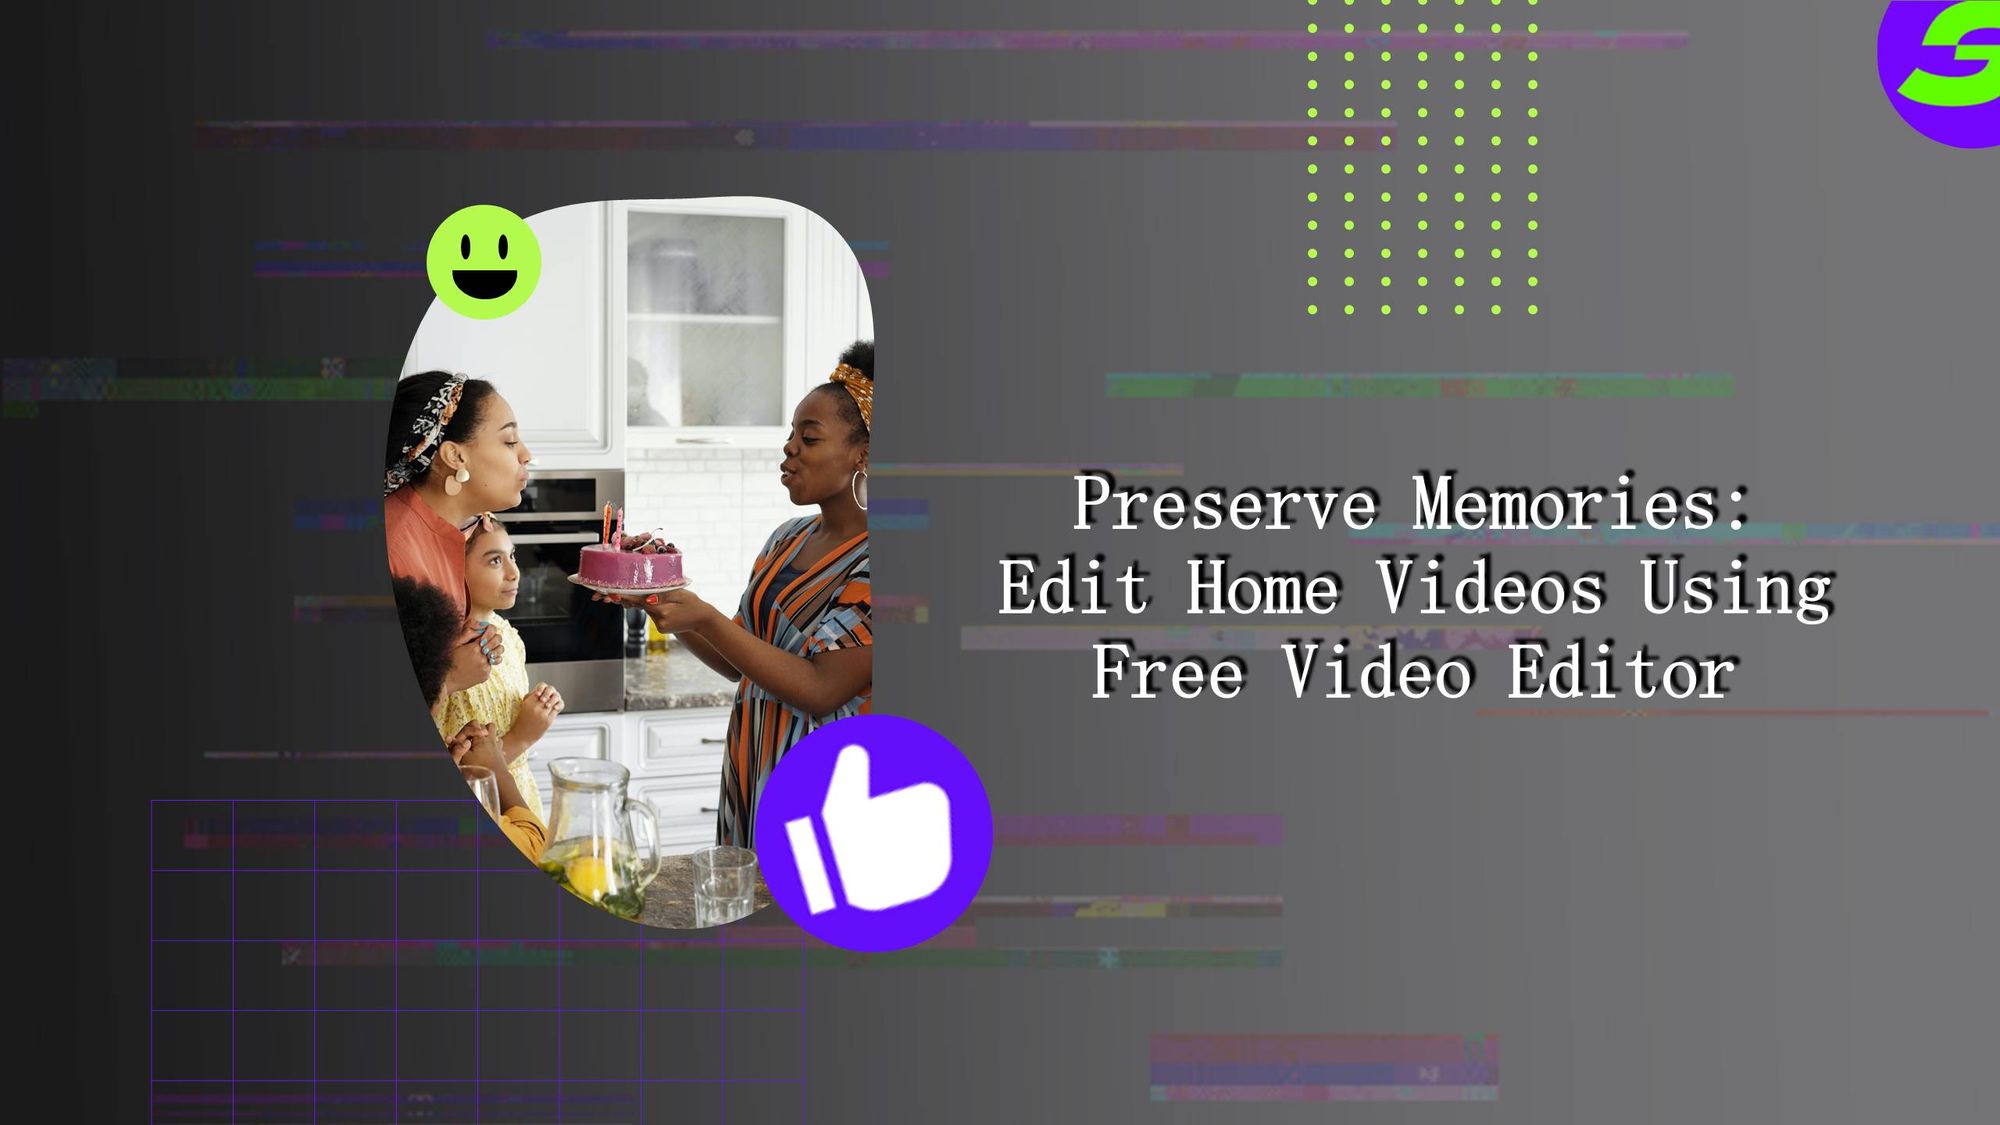 Edit Your Home Videos With Free Video Editor